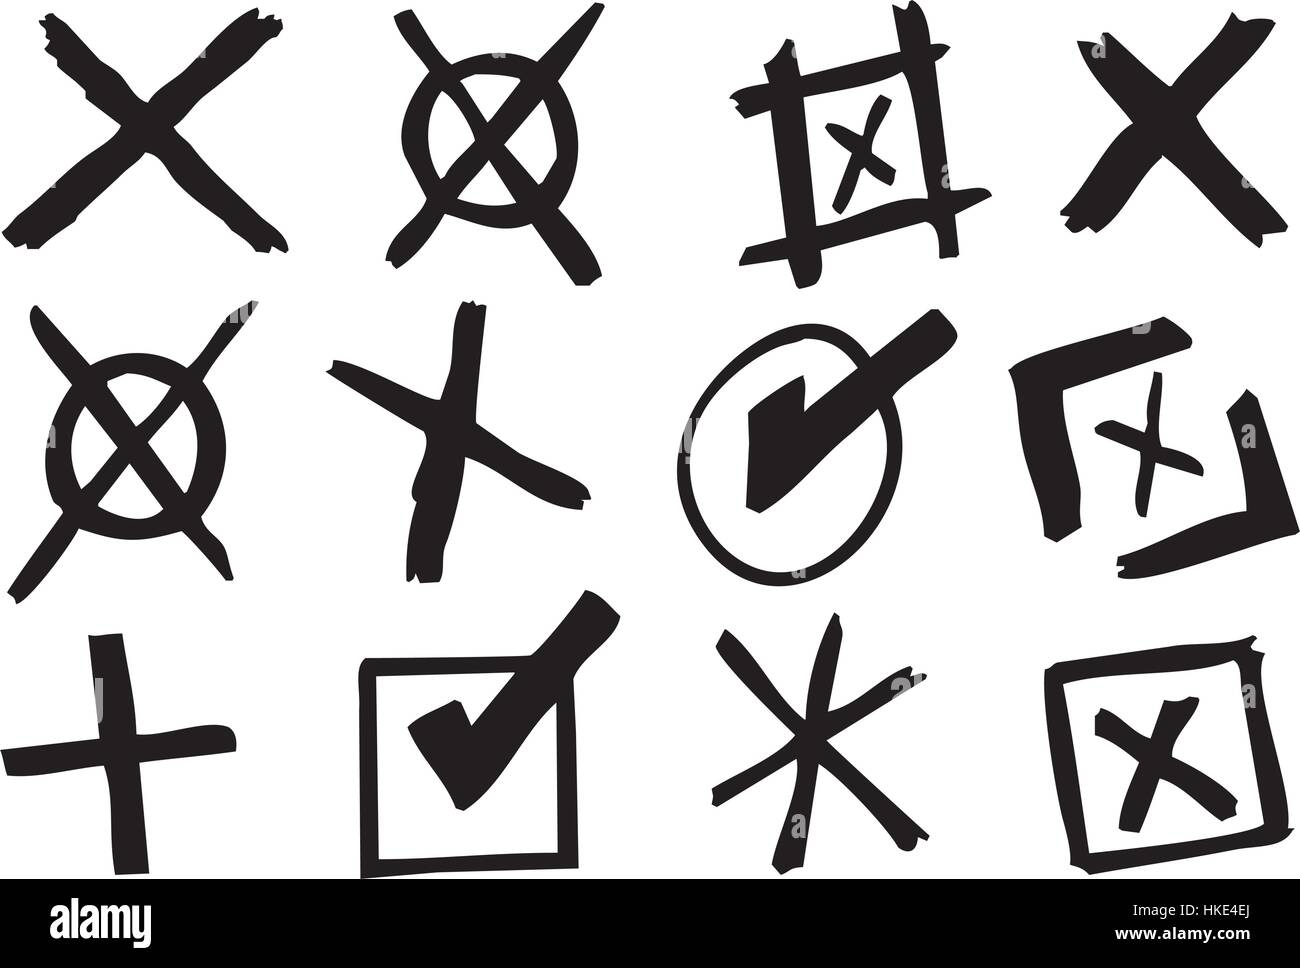 Make the right election cross. Stock Vector